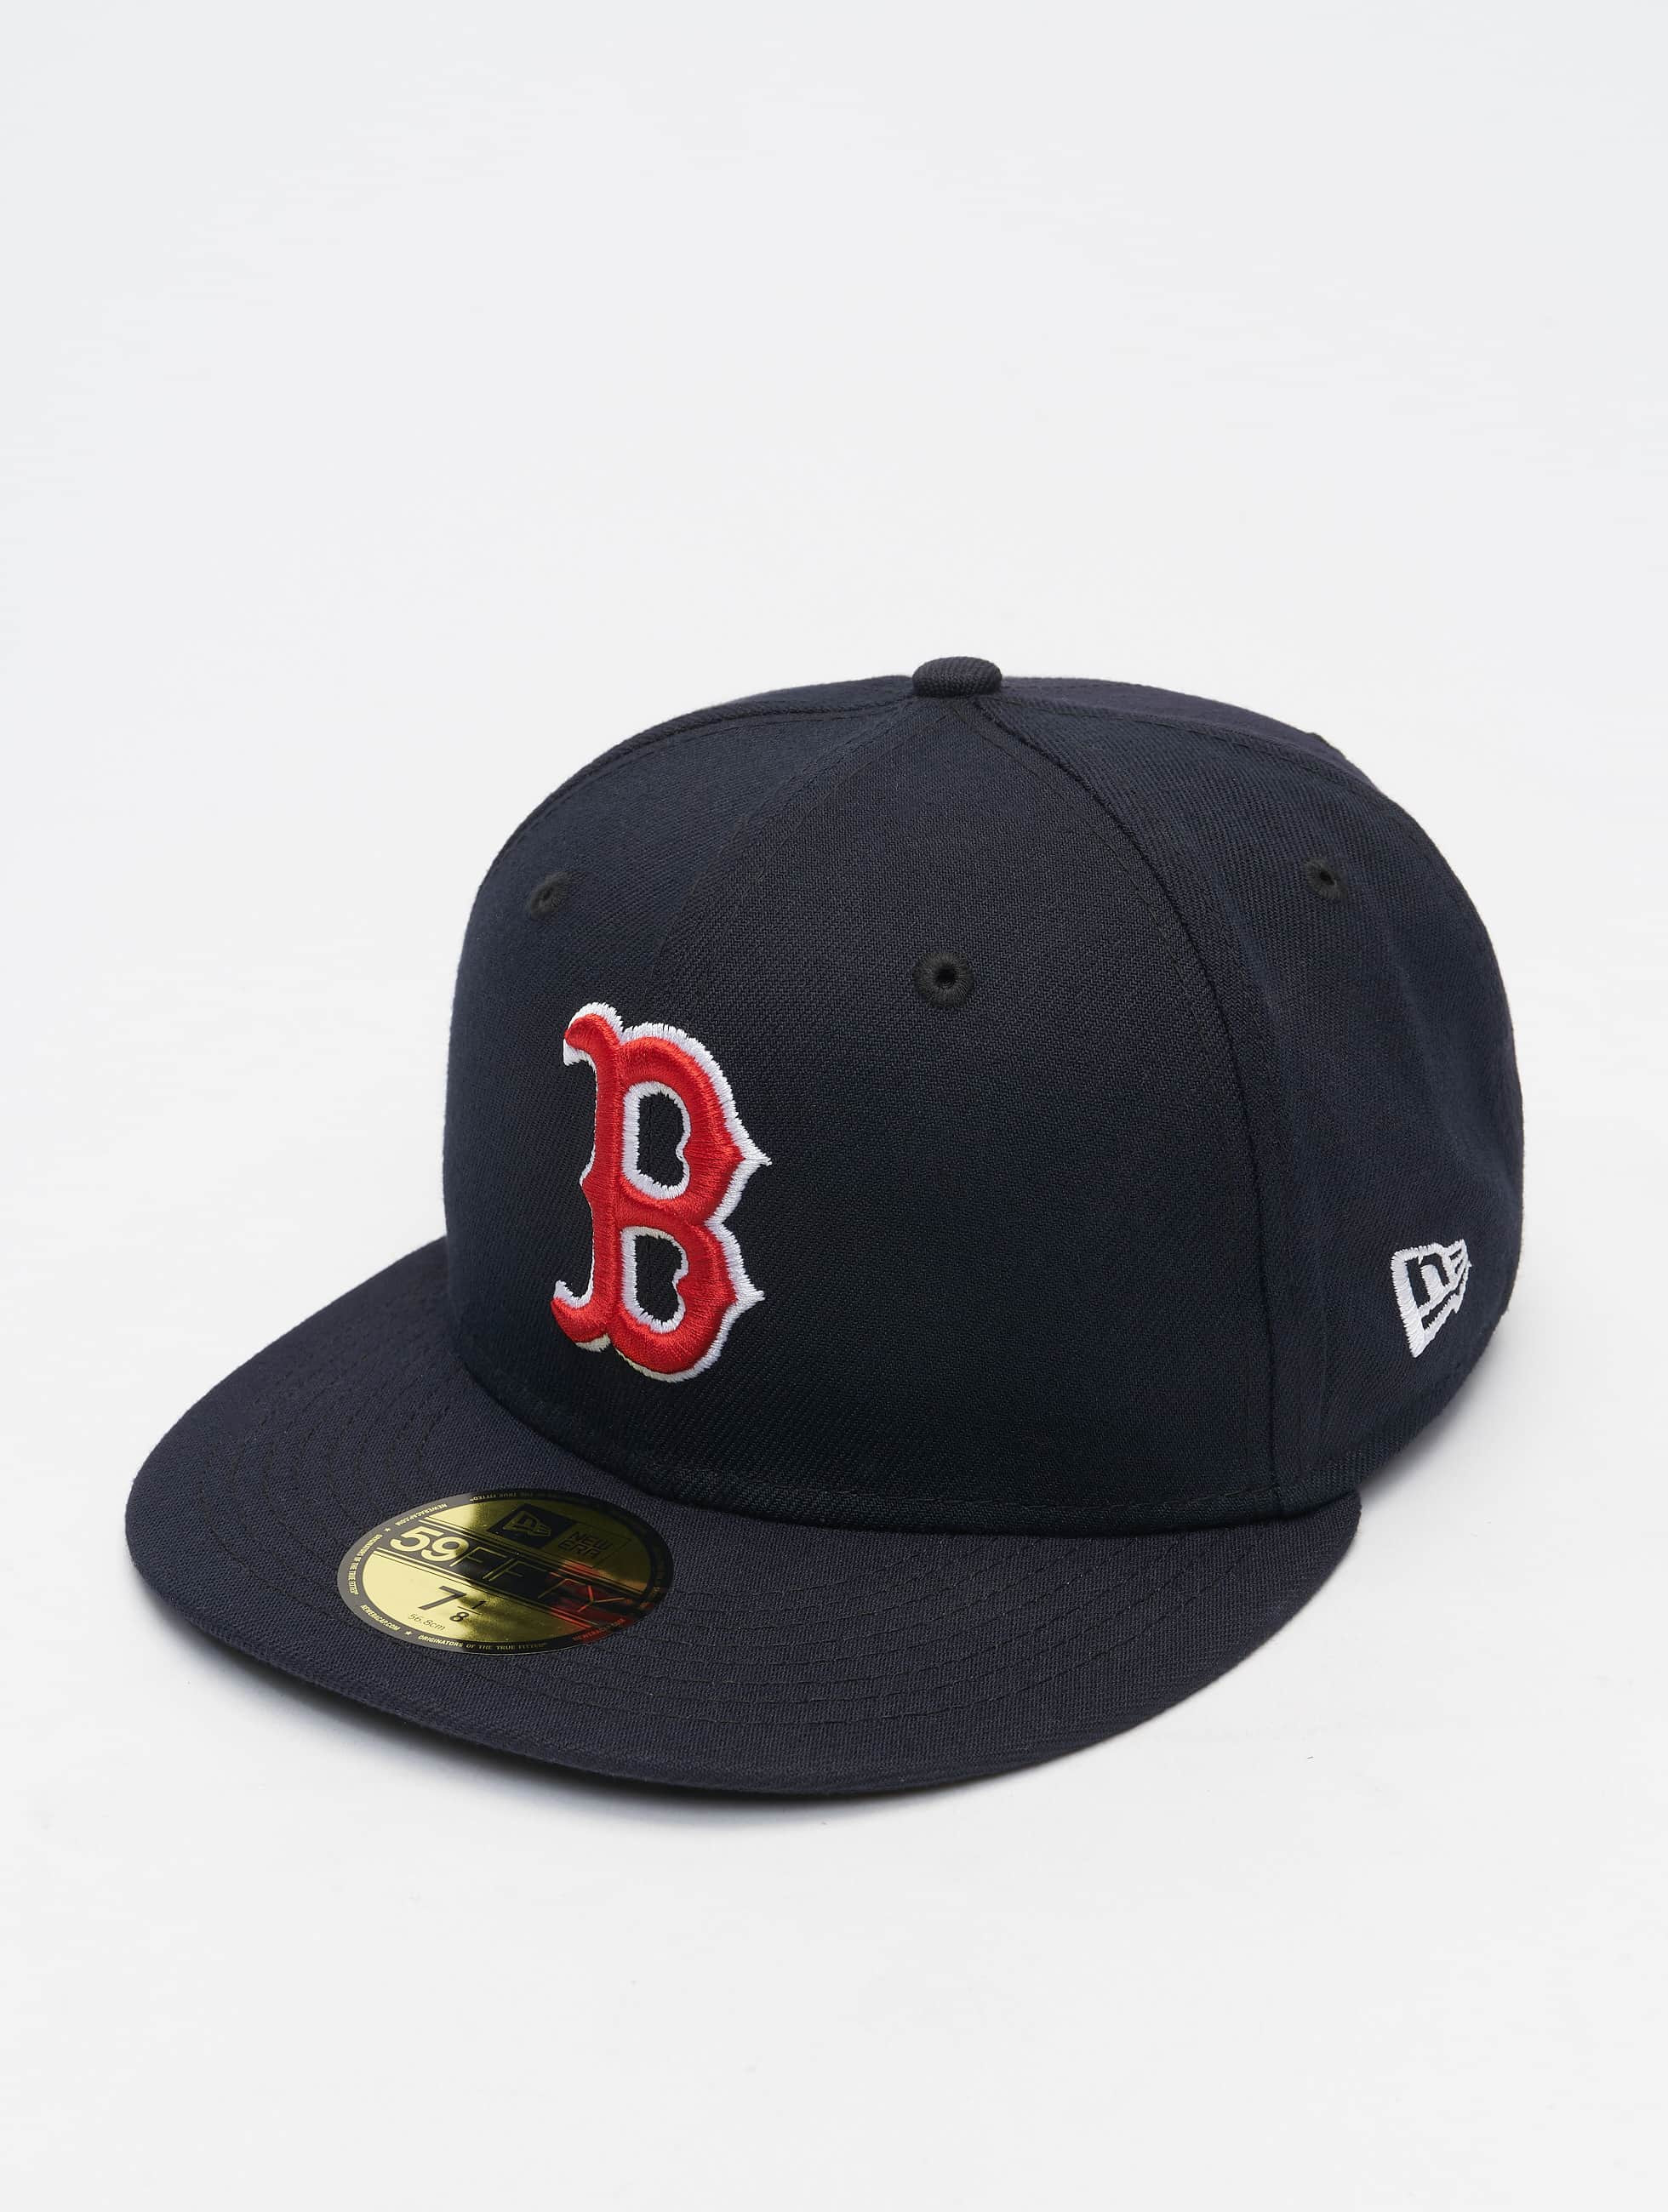 Order 47 Brand MLB Boston Red Sox 47 Clean Up Cap B navy Hats  Caps  from solebox  MBCY